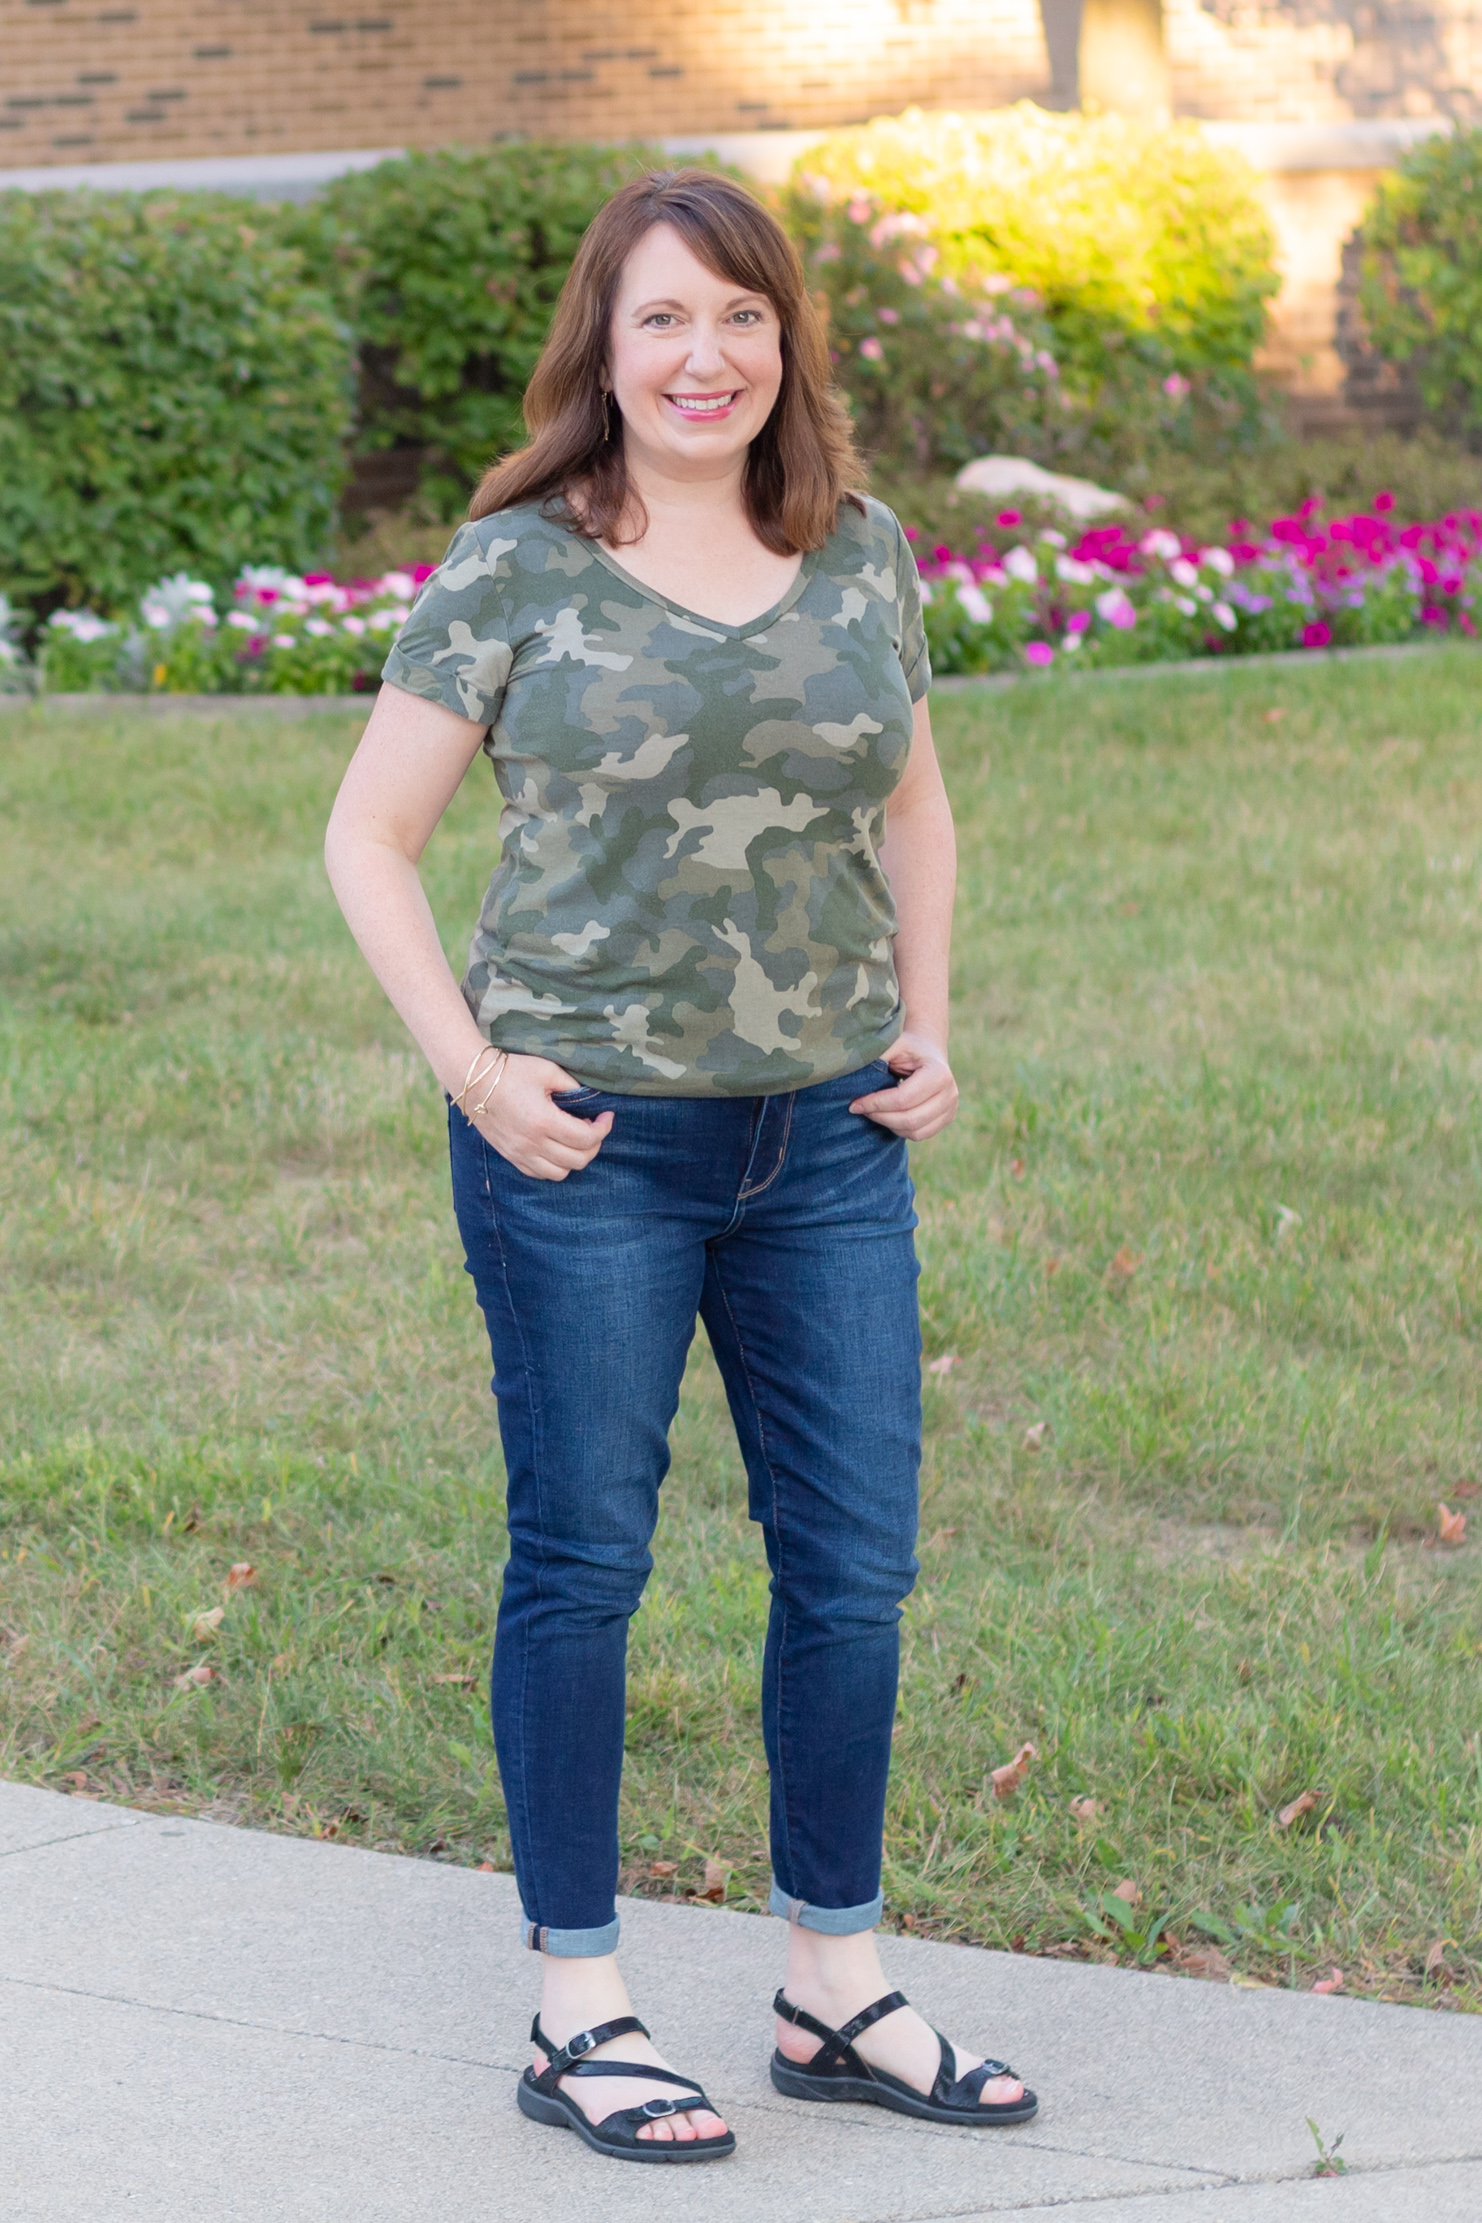 Dianna Modeling Camo Tee for Fall